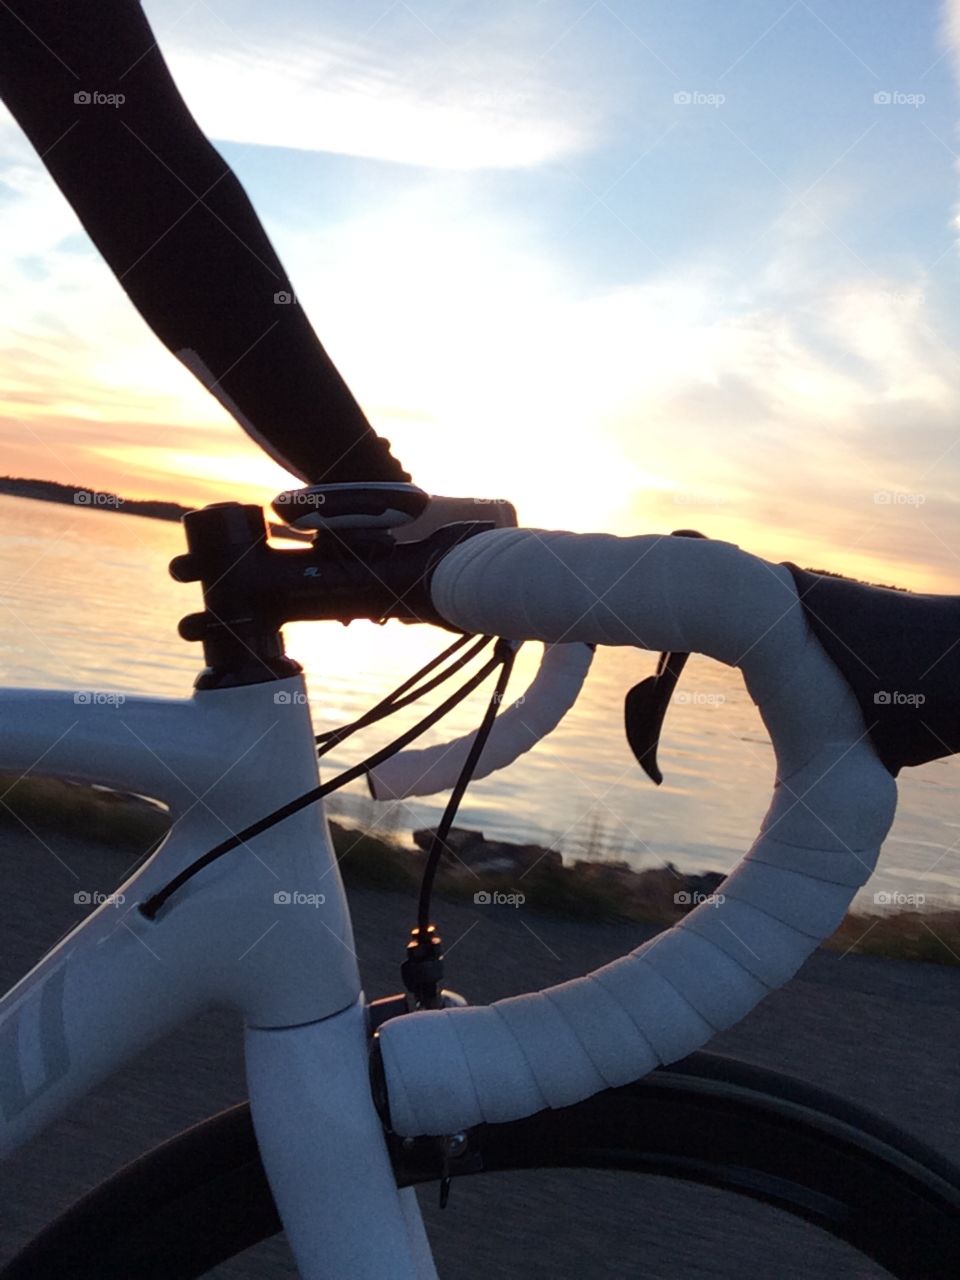 Bike ride in the sunset